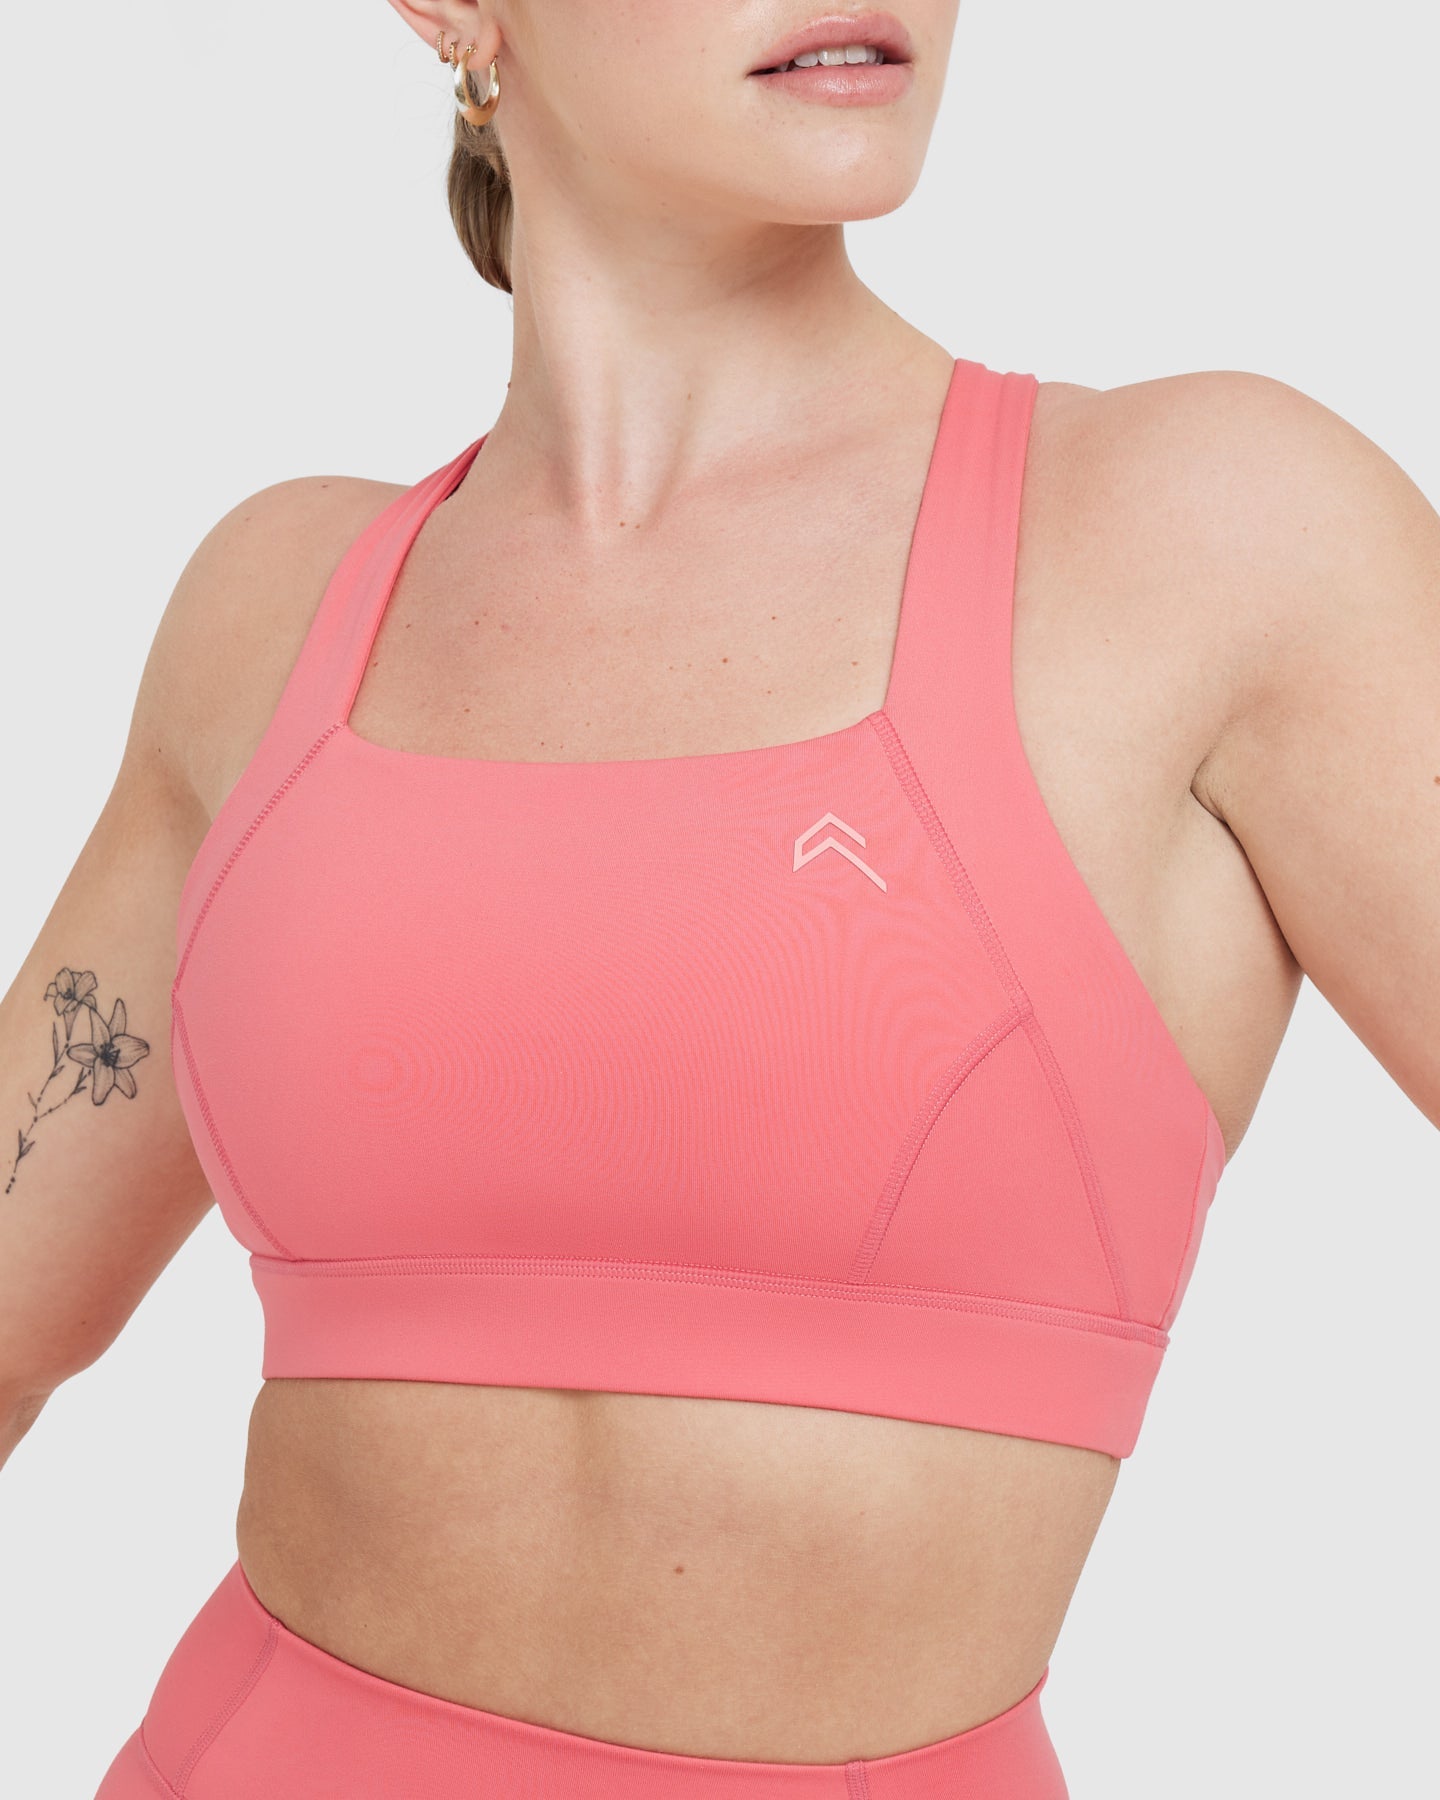 Laura Ashley Pink Active Sports Bras